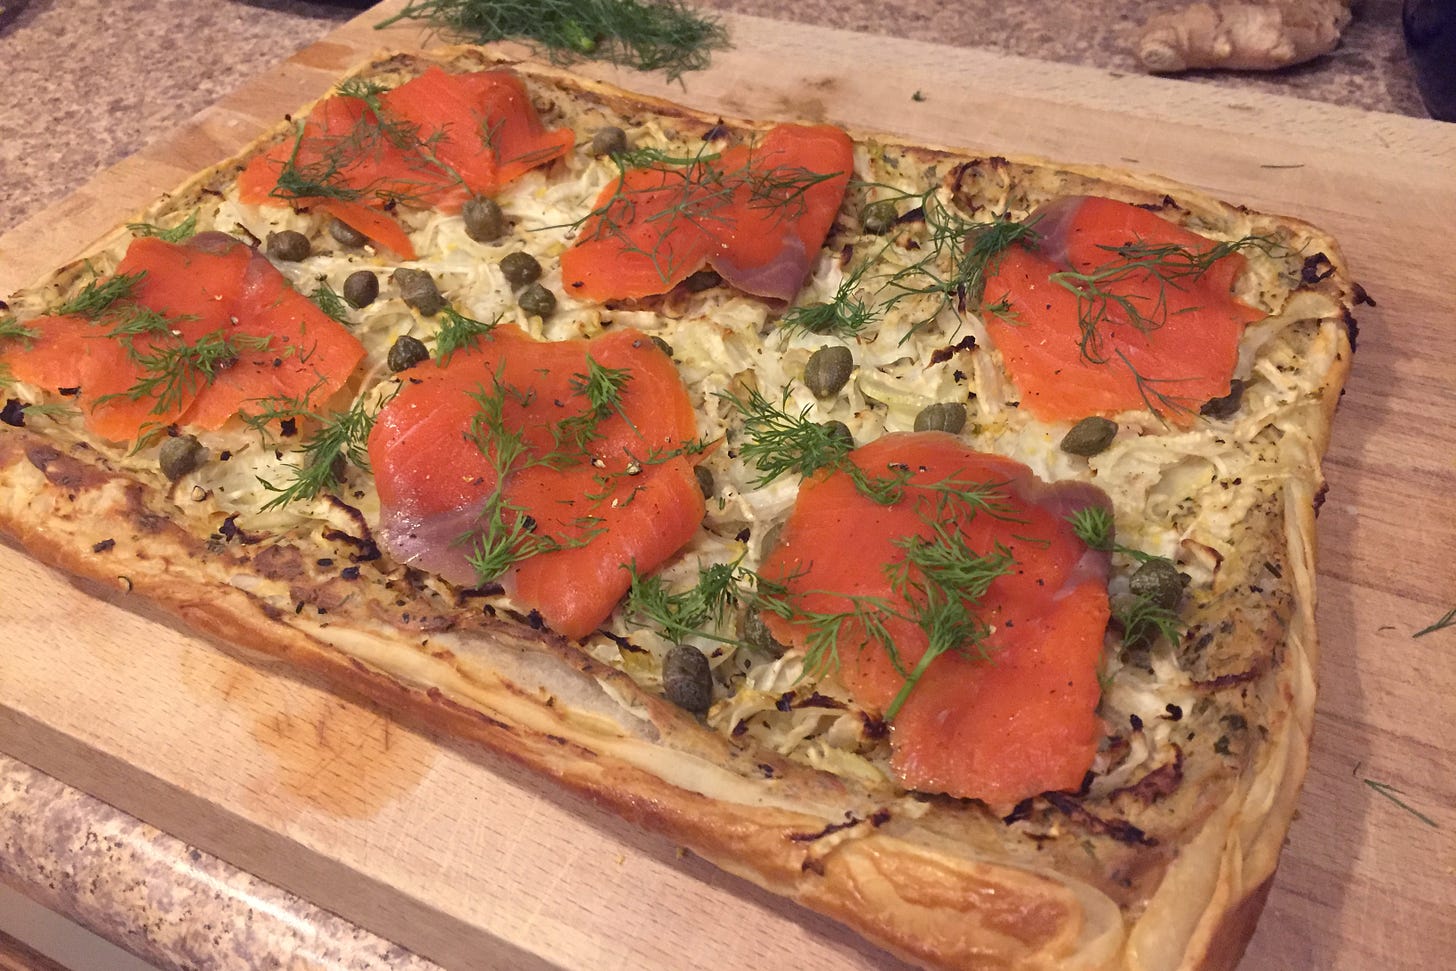 on a wooden cutting board, a puff pastry tart with fennel and cheeze on the bottom, topped with slices of smoked salmon, capers, and springs of fresh dill.